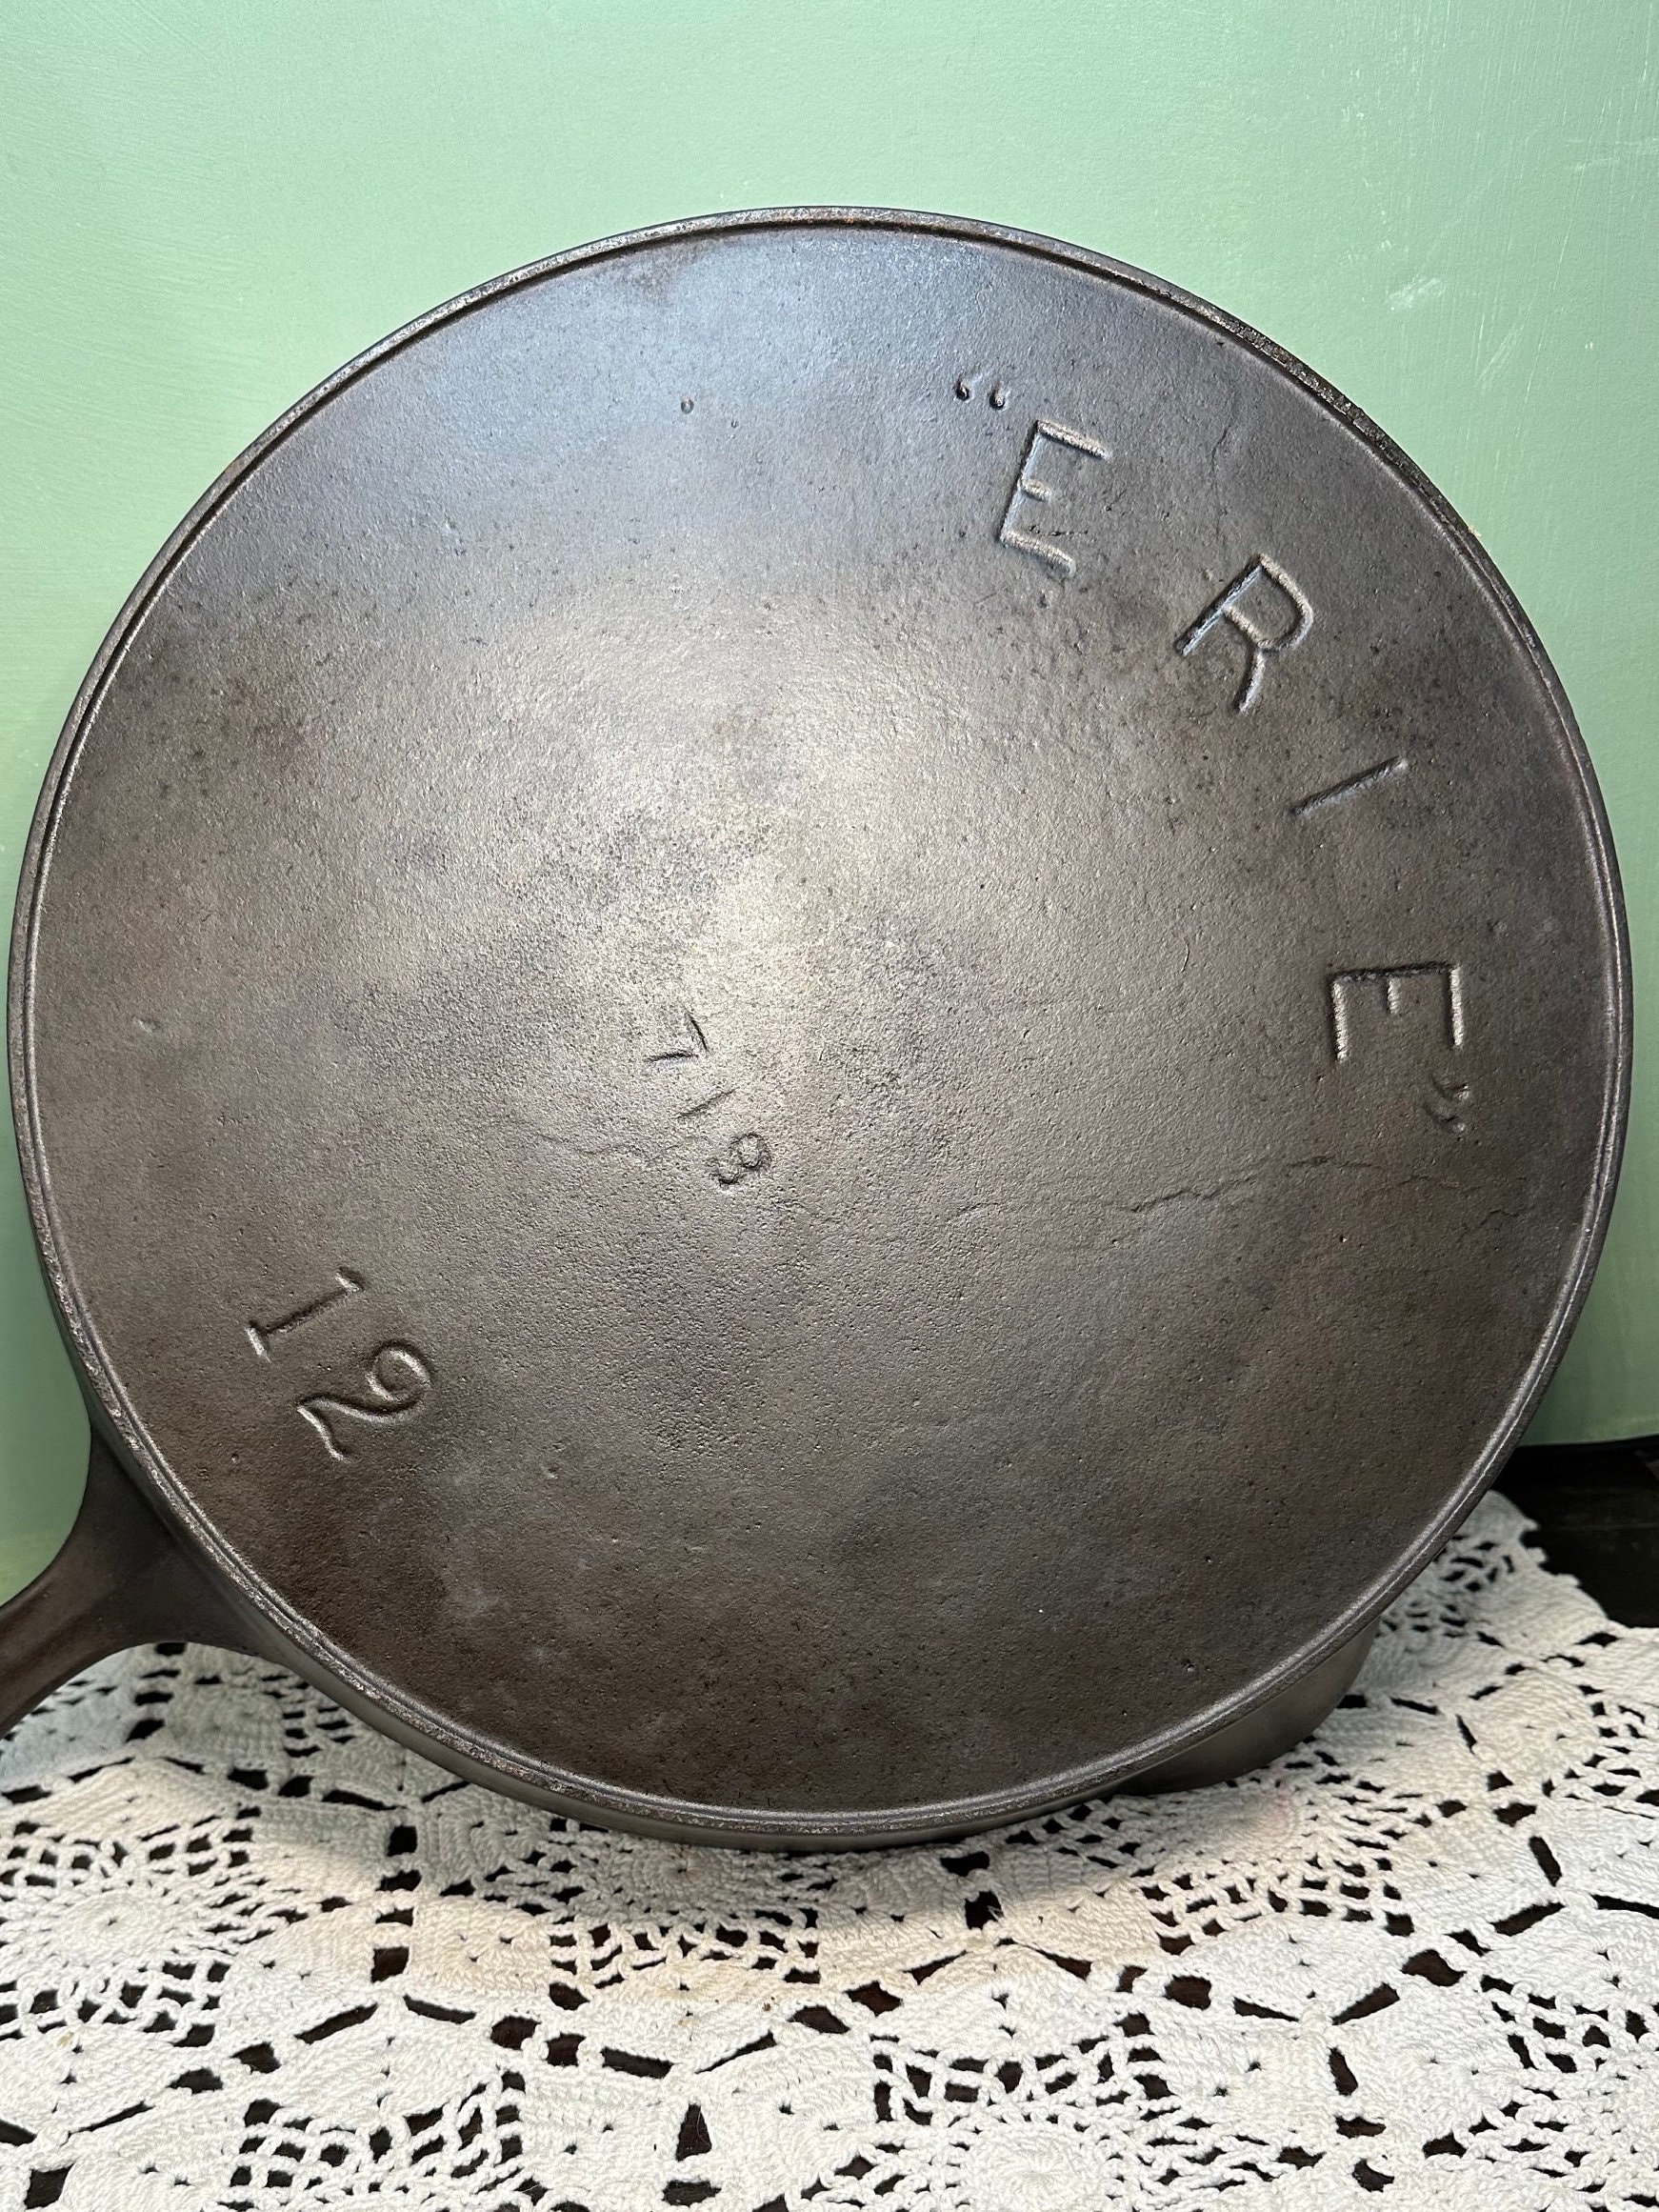 Channeling his Erie, Pa. roots by restoring Griswold cast-iron skillets